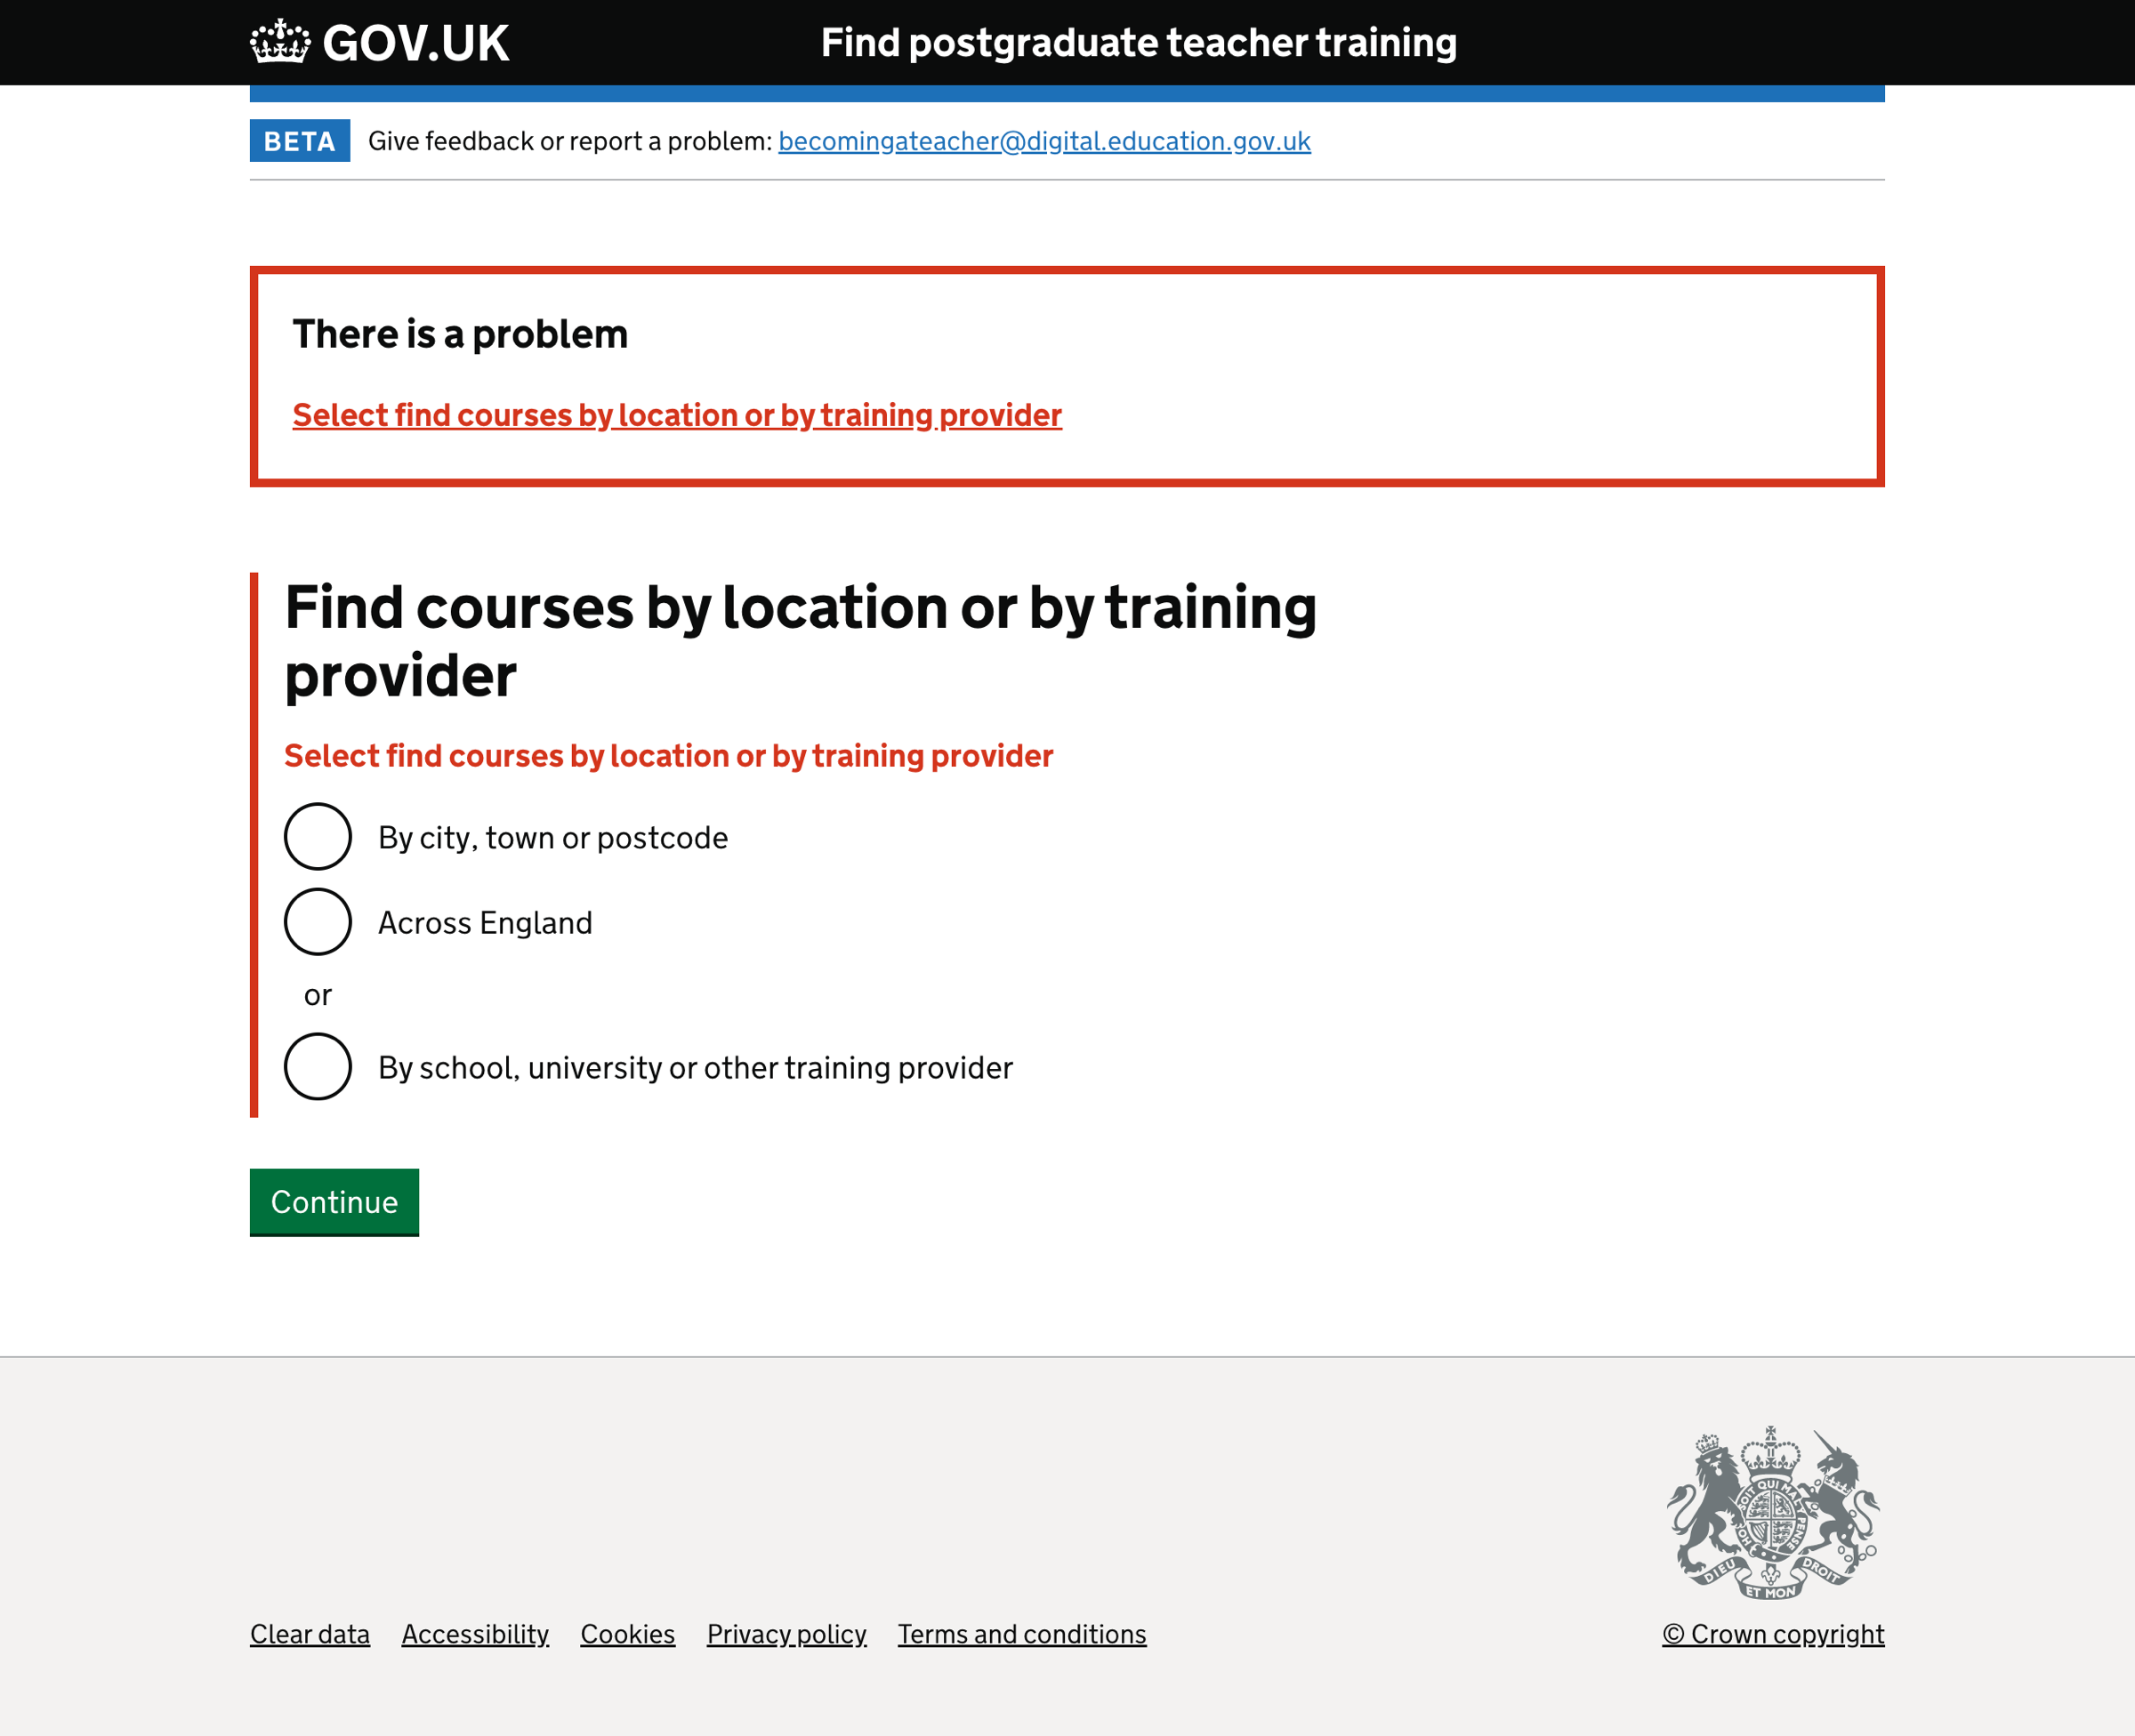 Find courses by location or training provider error message